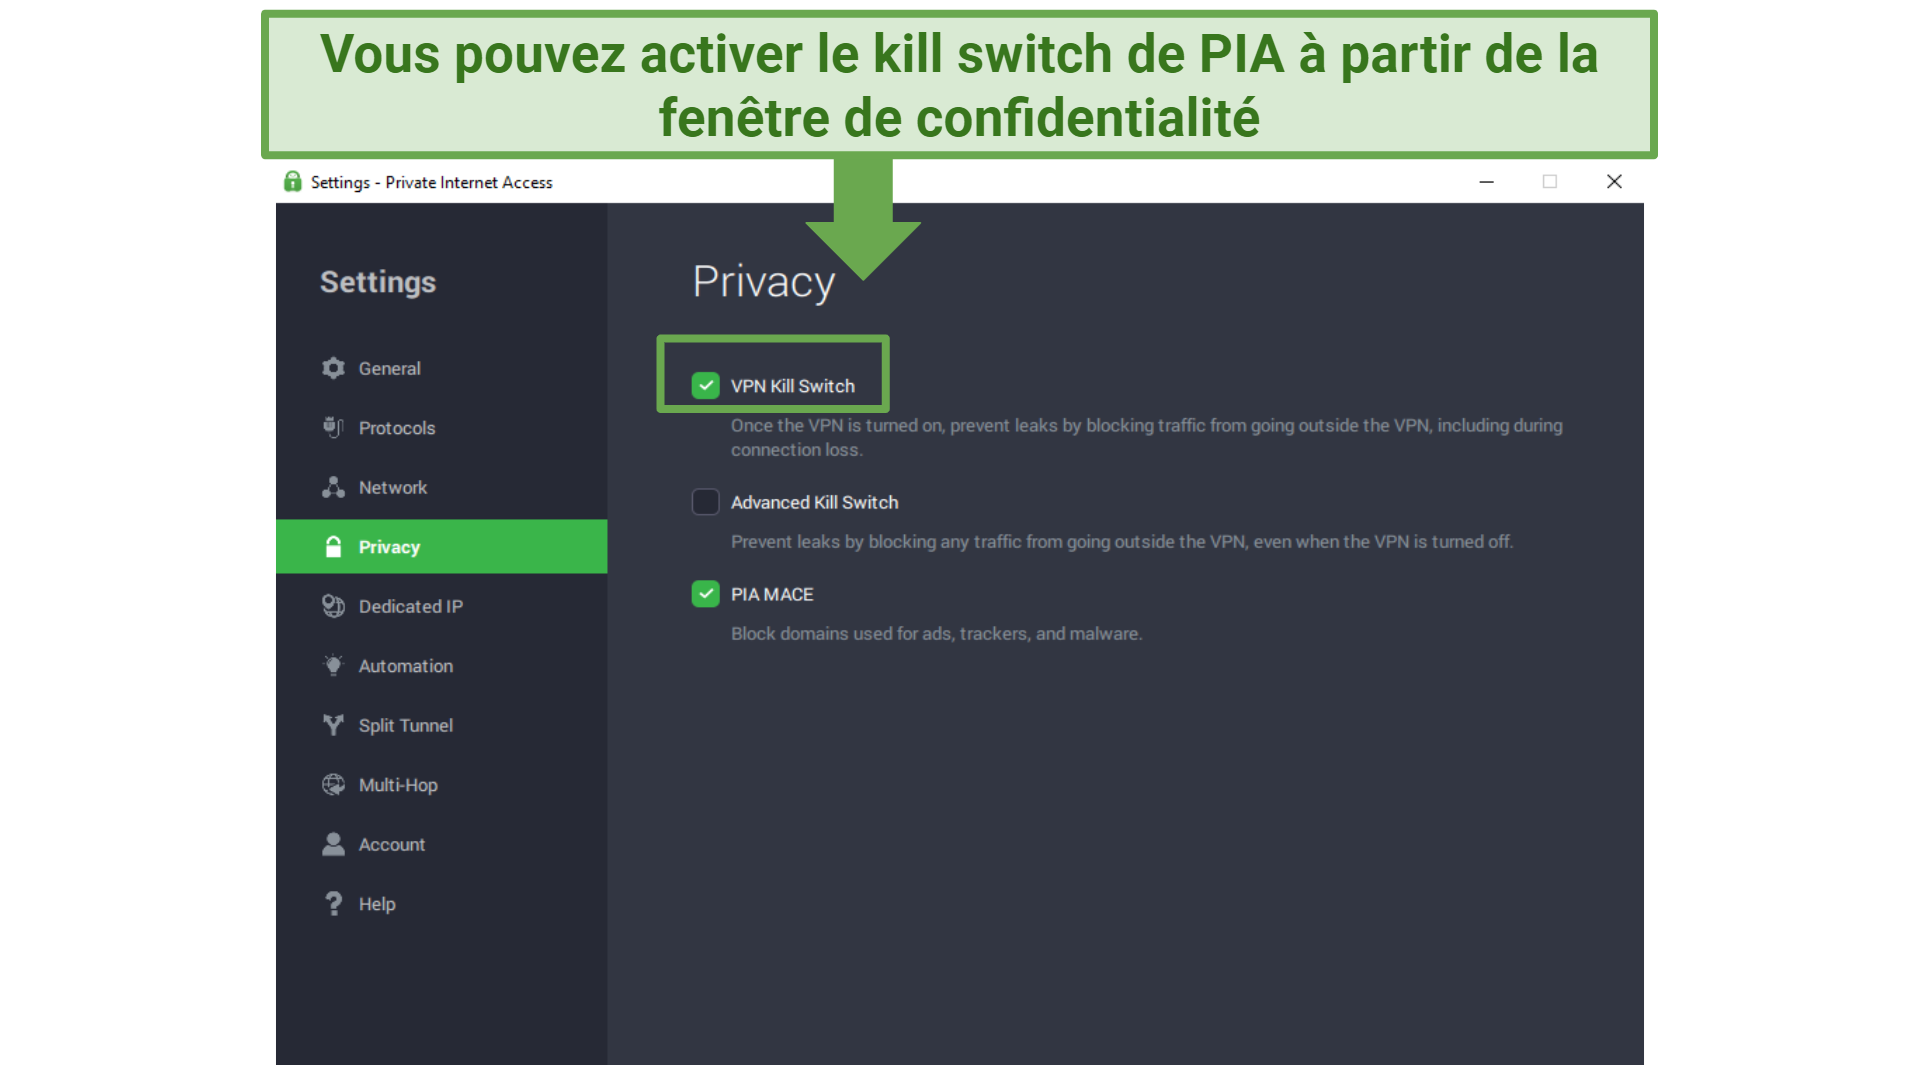 A screenshot of PIA showing how to activate the VPN kill switch.